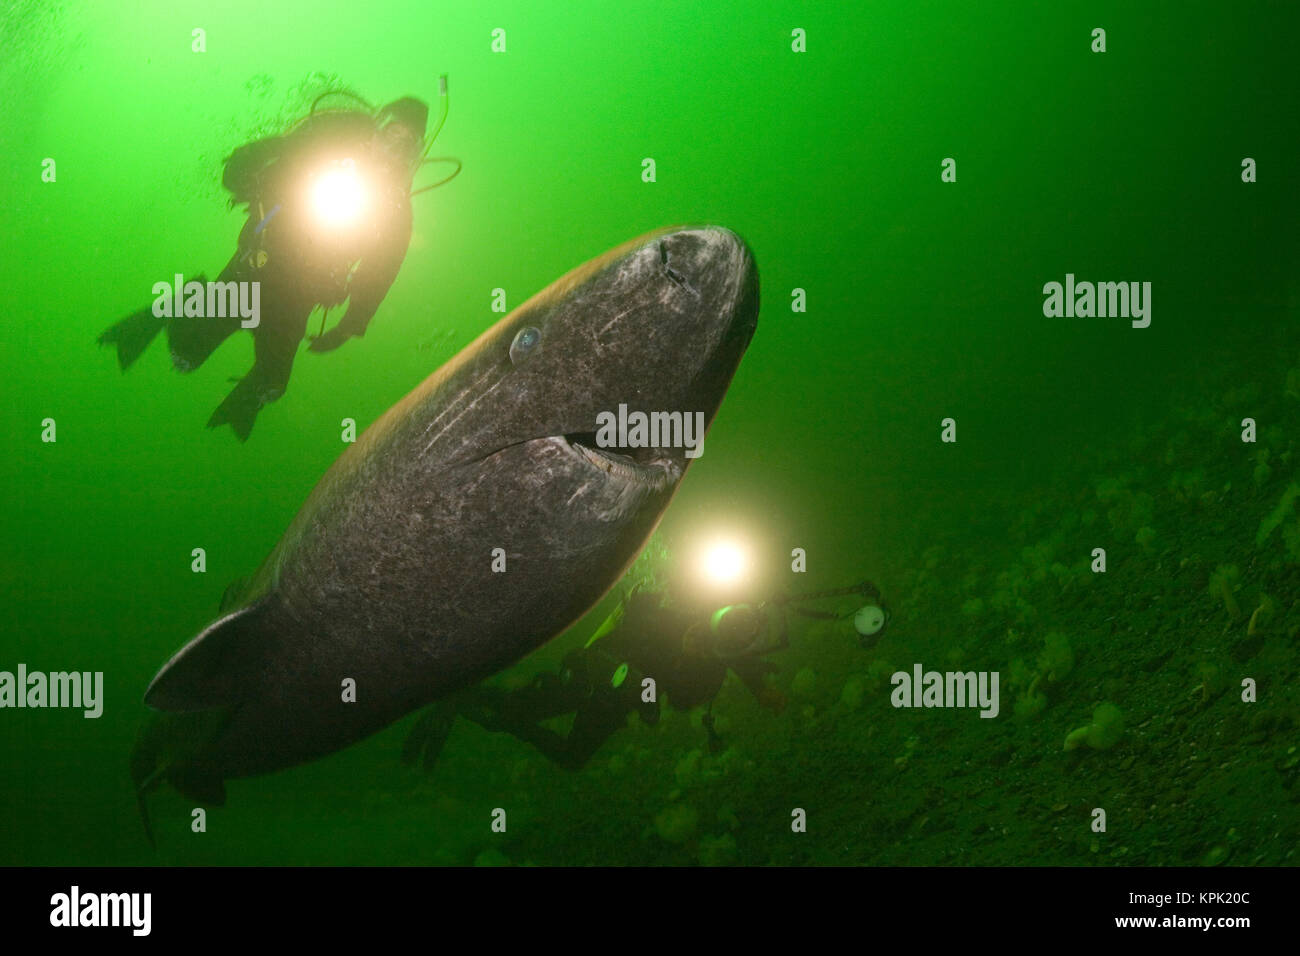 Greenland shark or Greenland sleeper shark, Somniosus microcephalus and divers, St. Lawrence River estuary, Canada, (shark was wild & unrestrained ) Stock Photo